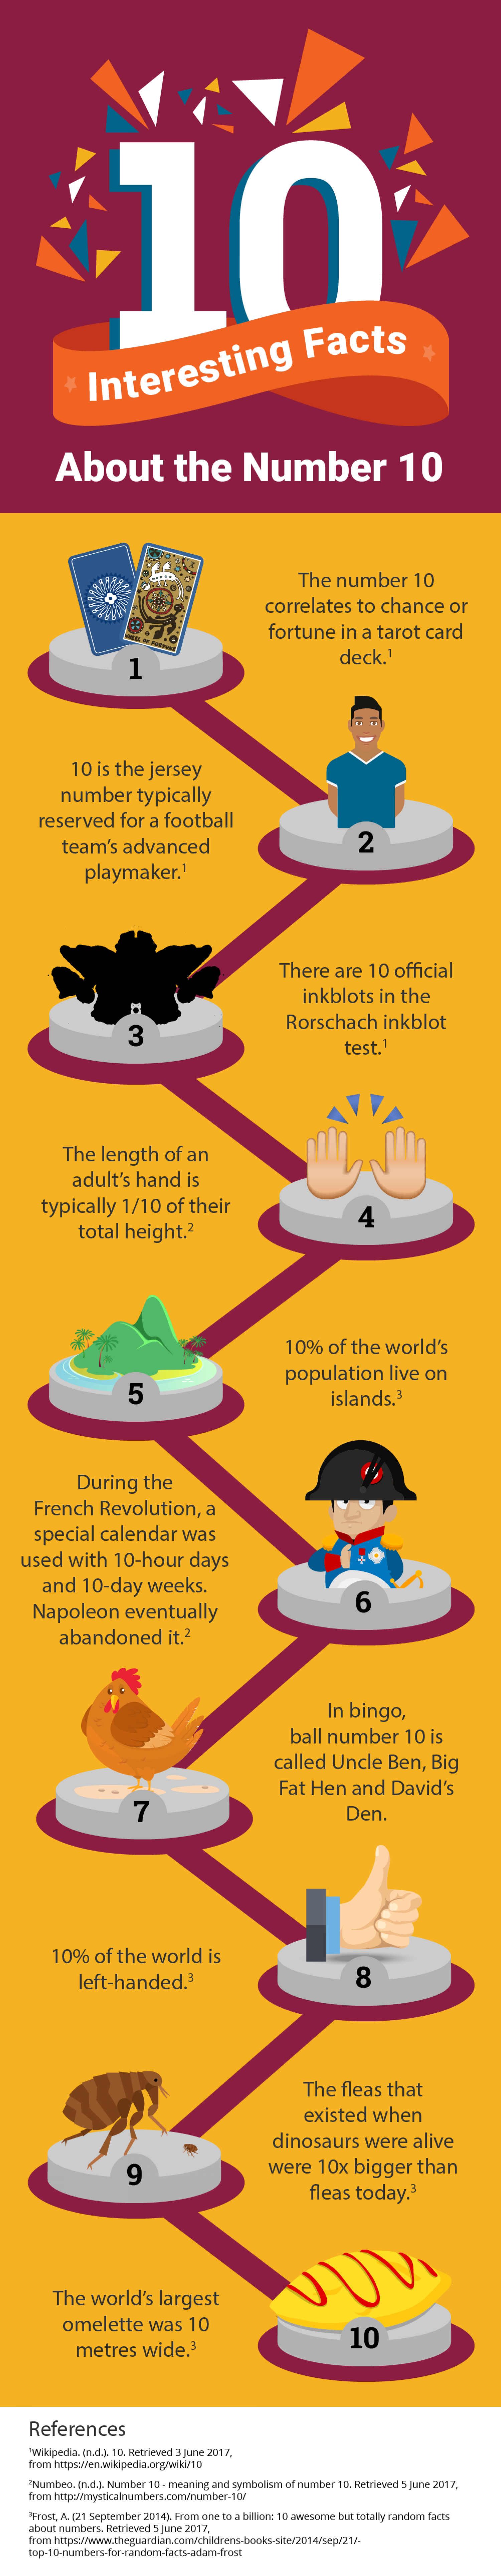 10 Things You Didn’t Know About the Number 10 Infographic